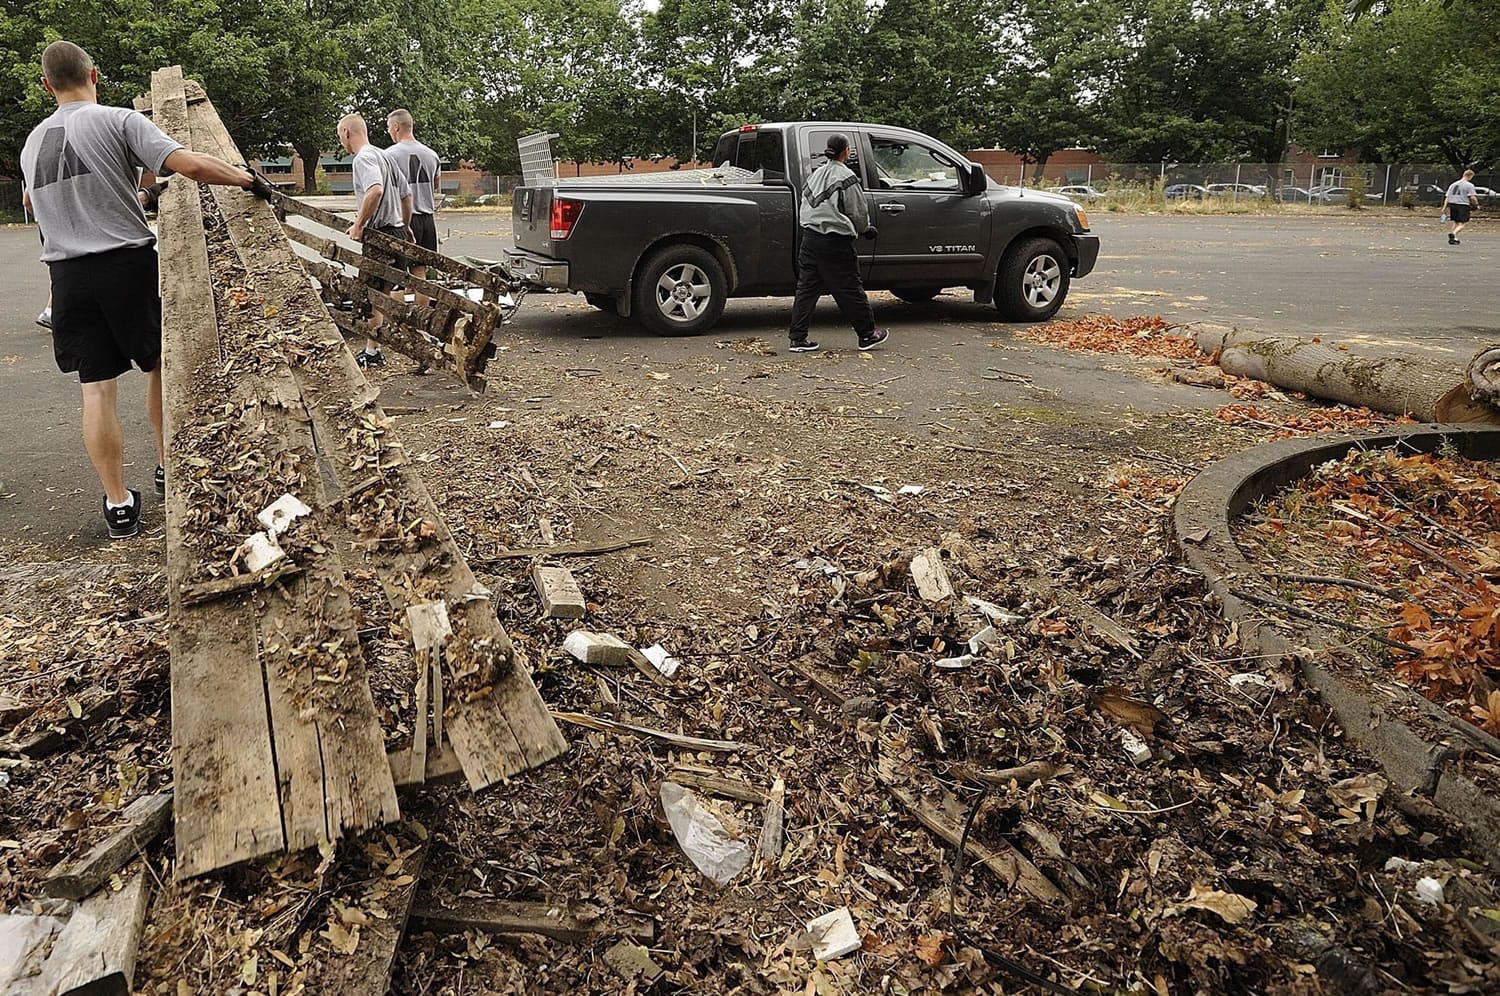 Personnel from the Washington Army National Guard's 790th Chemical Company clean up debris at a Vancouver Barracks maintenance facility Wednesday. It was the final day of military presence at the site that became a U.S.